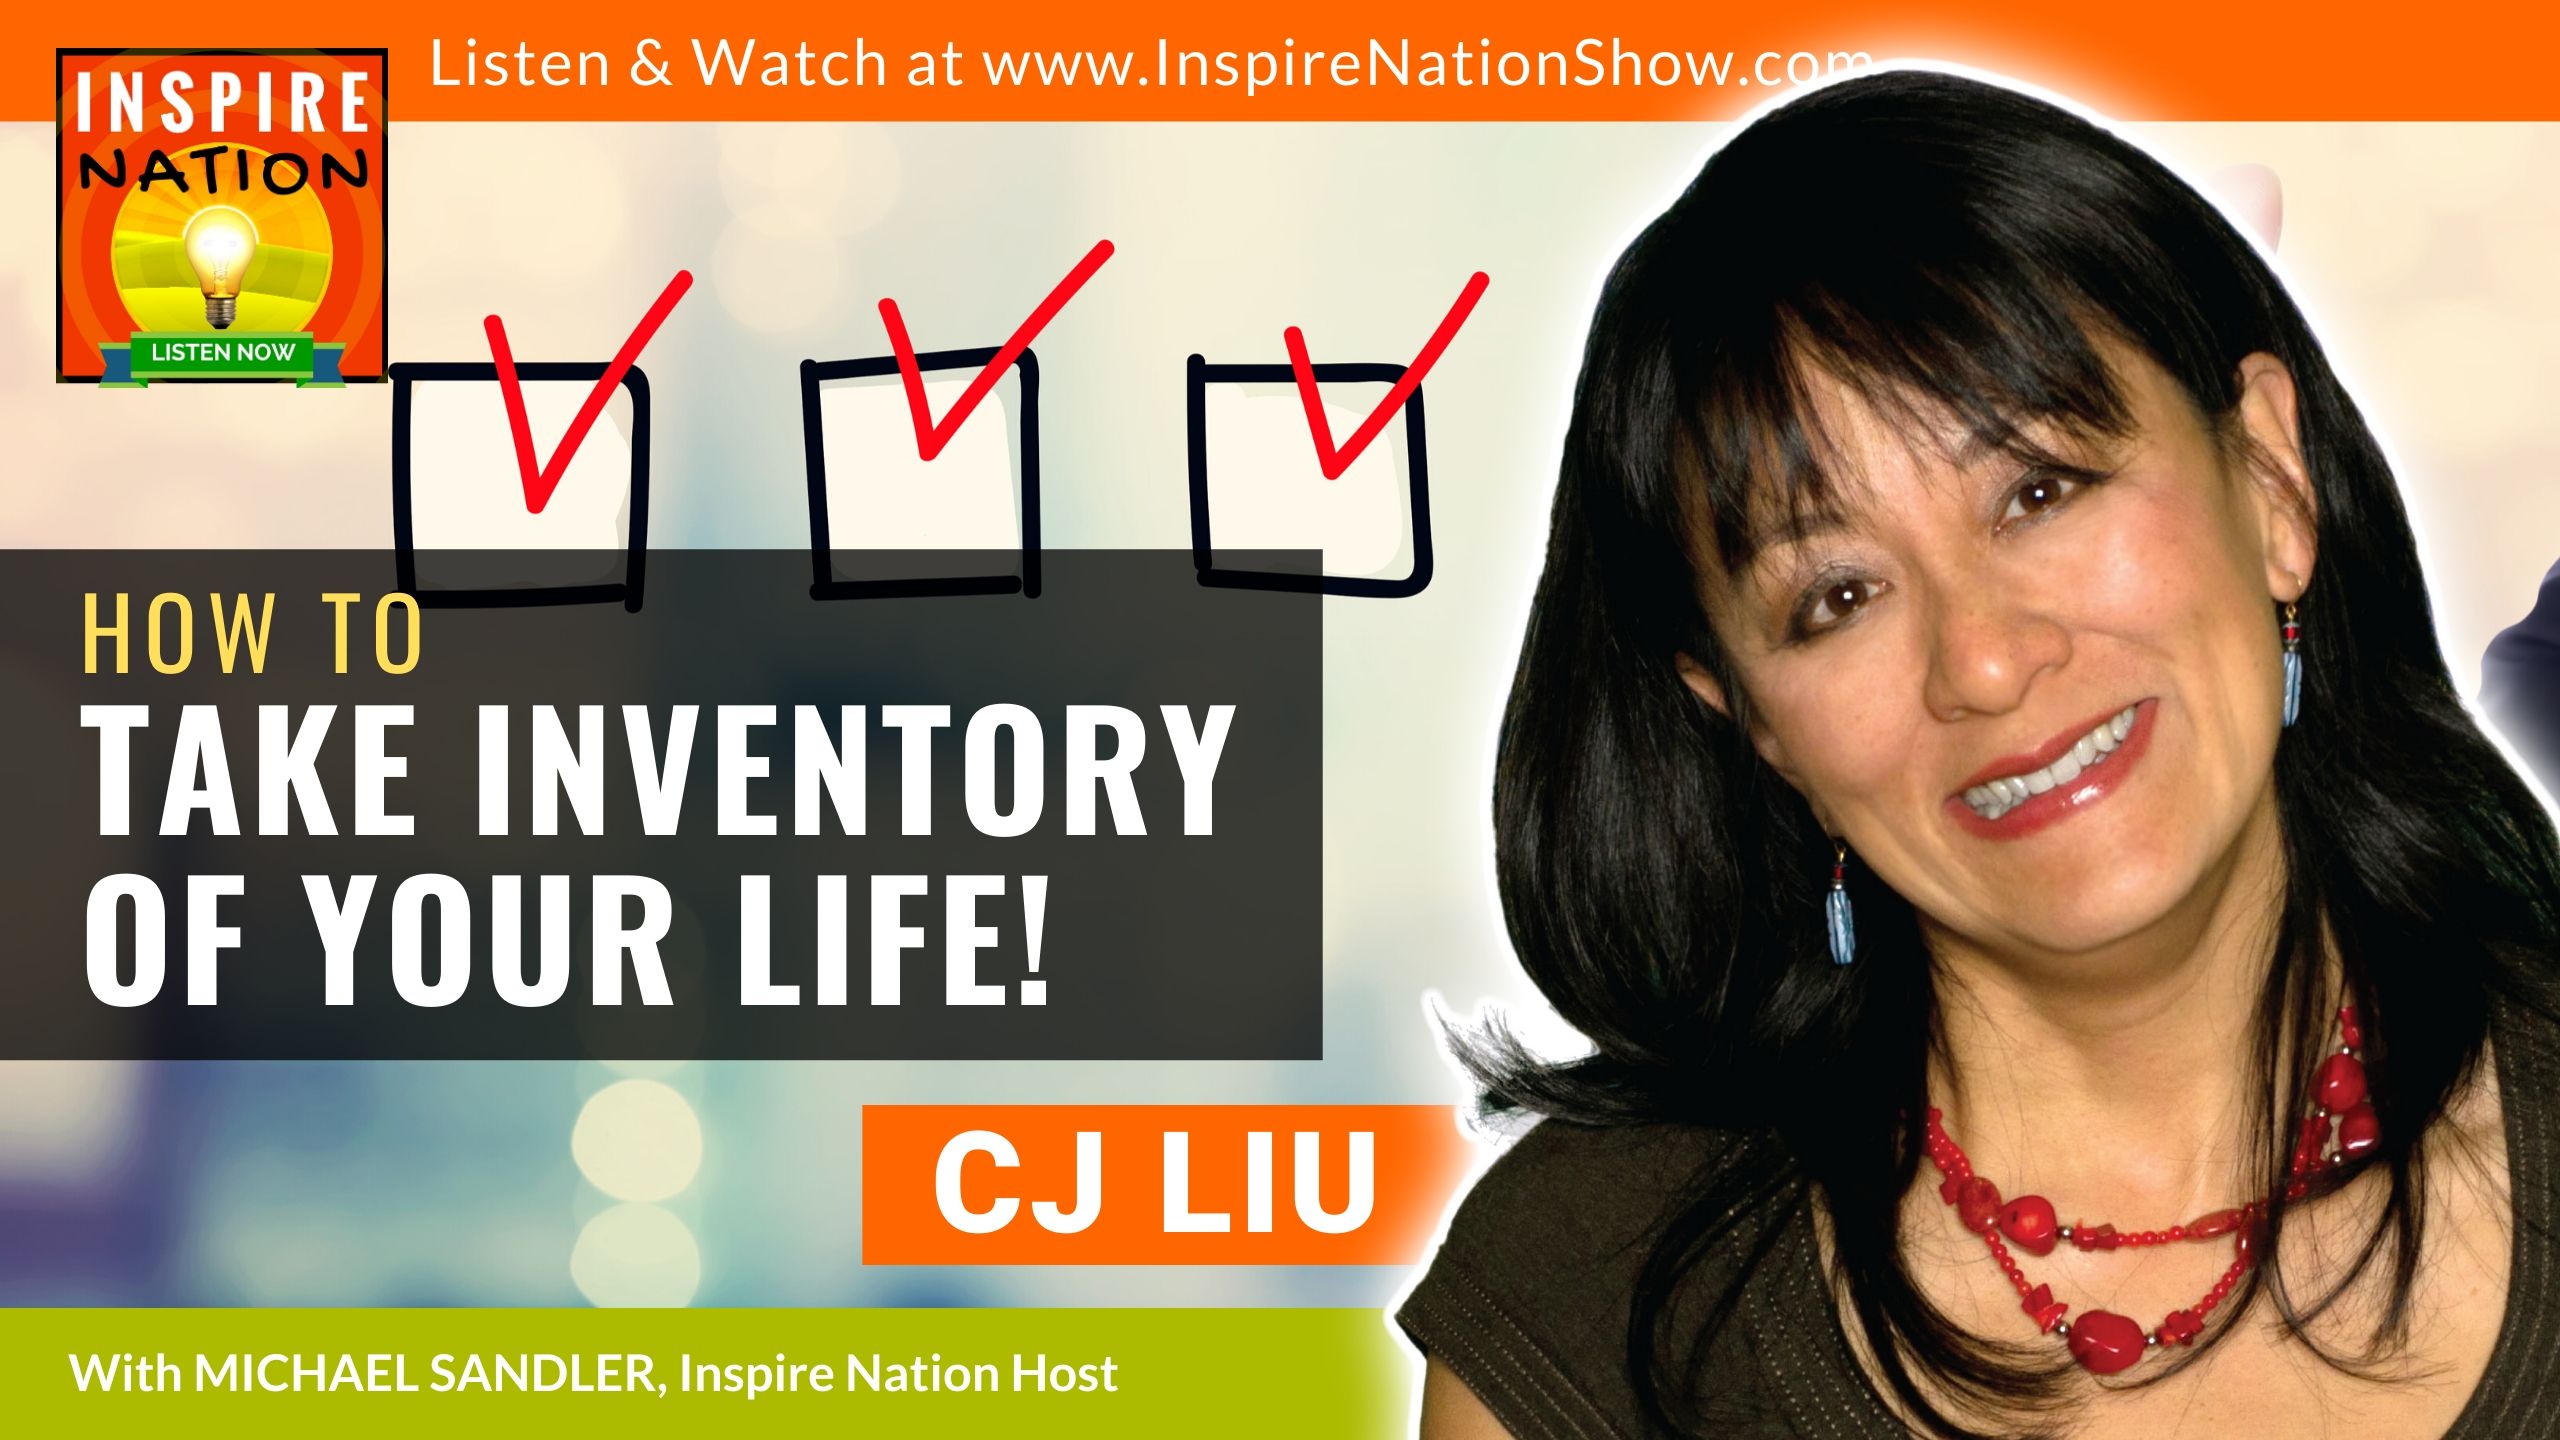 Michael Sandler and CJ Liu talk about taking inventory of your life, in order to release the old and welcome in the new!